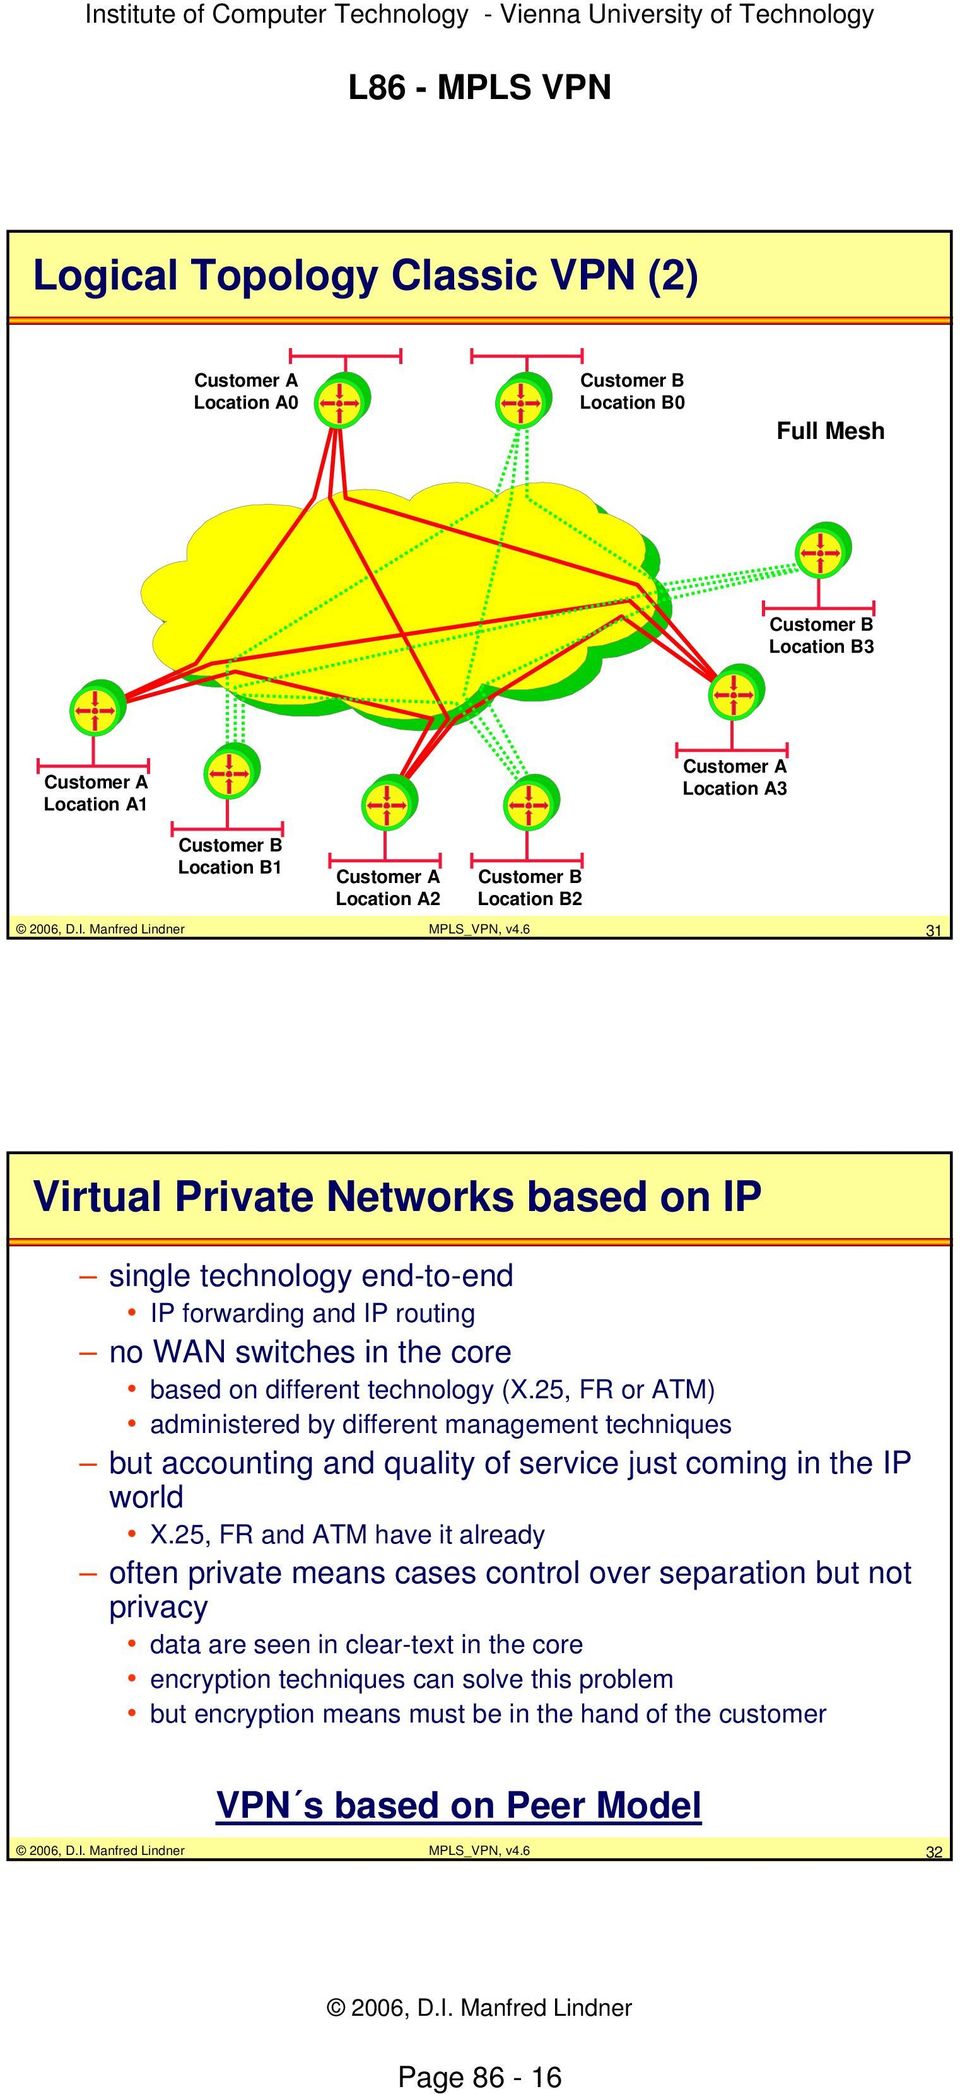 6 31 Virtual Private Networks based on IP single technology end-to-end IP forwarding and IP routing no WAN switches in the core based on different technology (X.